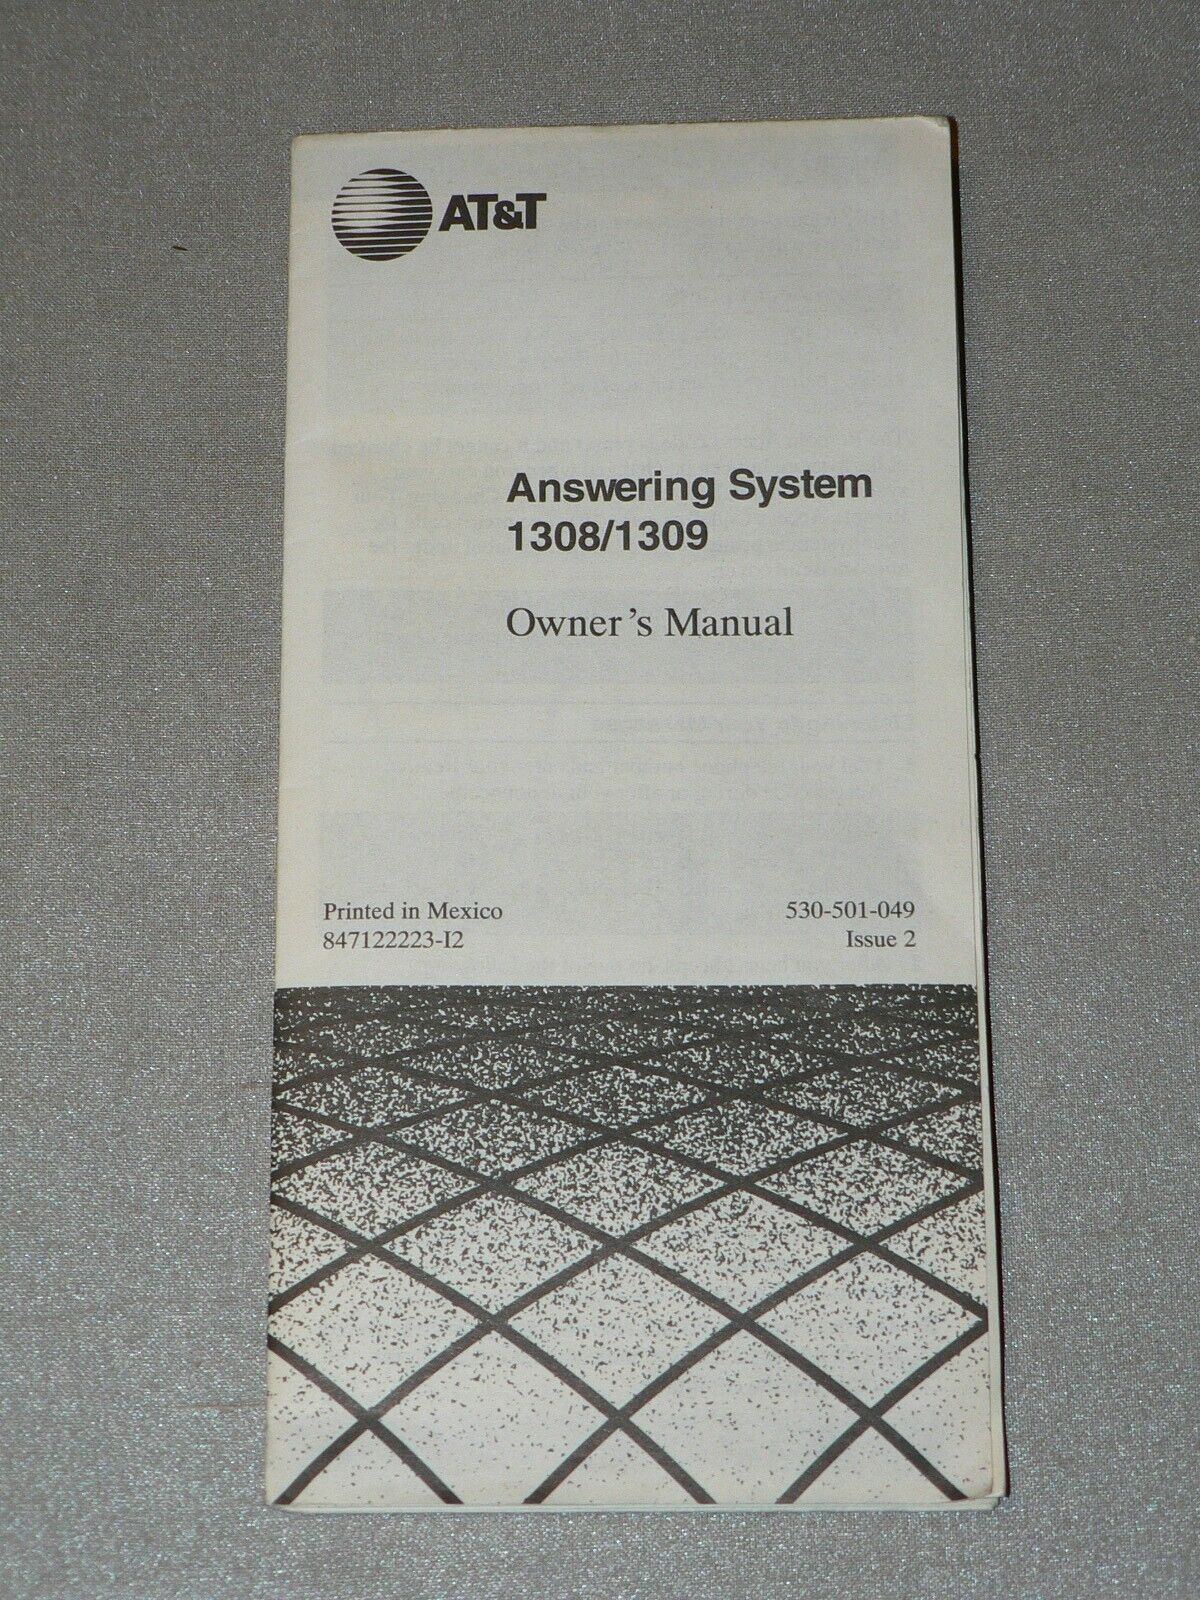 At&t  Owner's Manual For 1308/1309 Answering System Machine  New